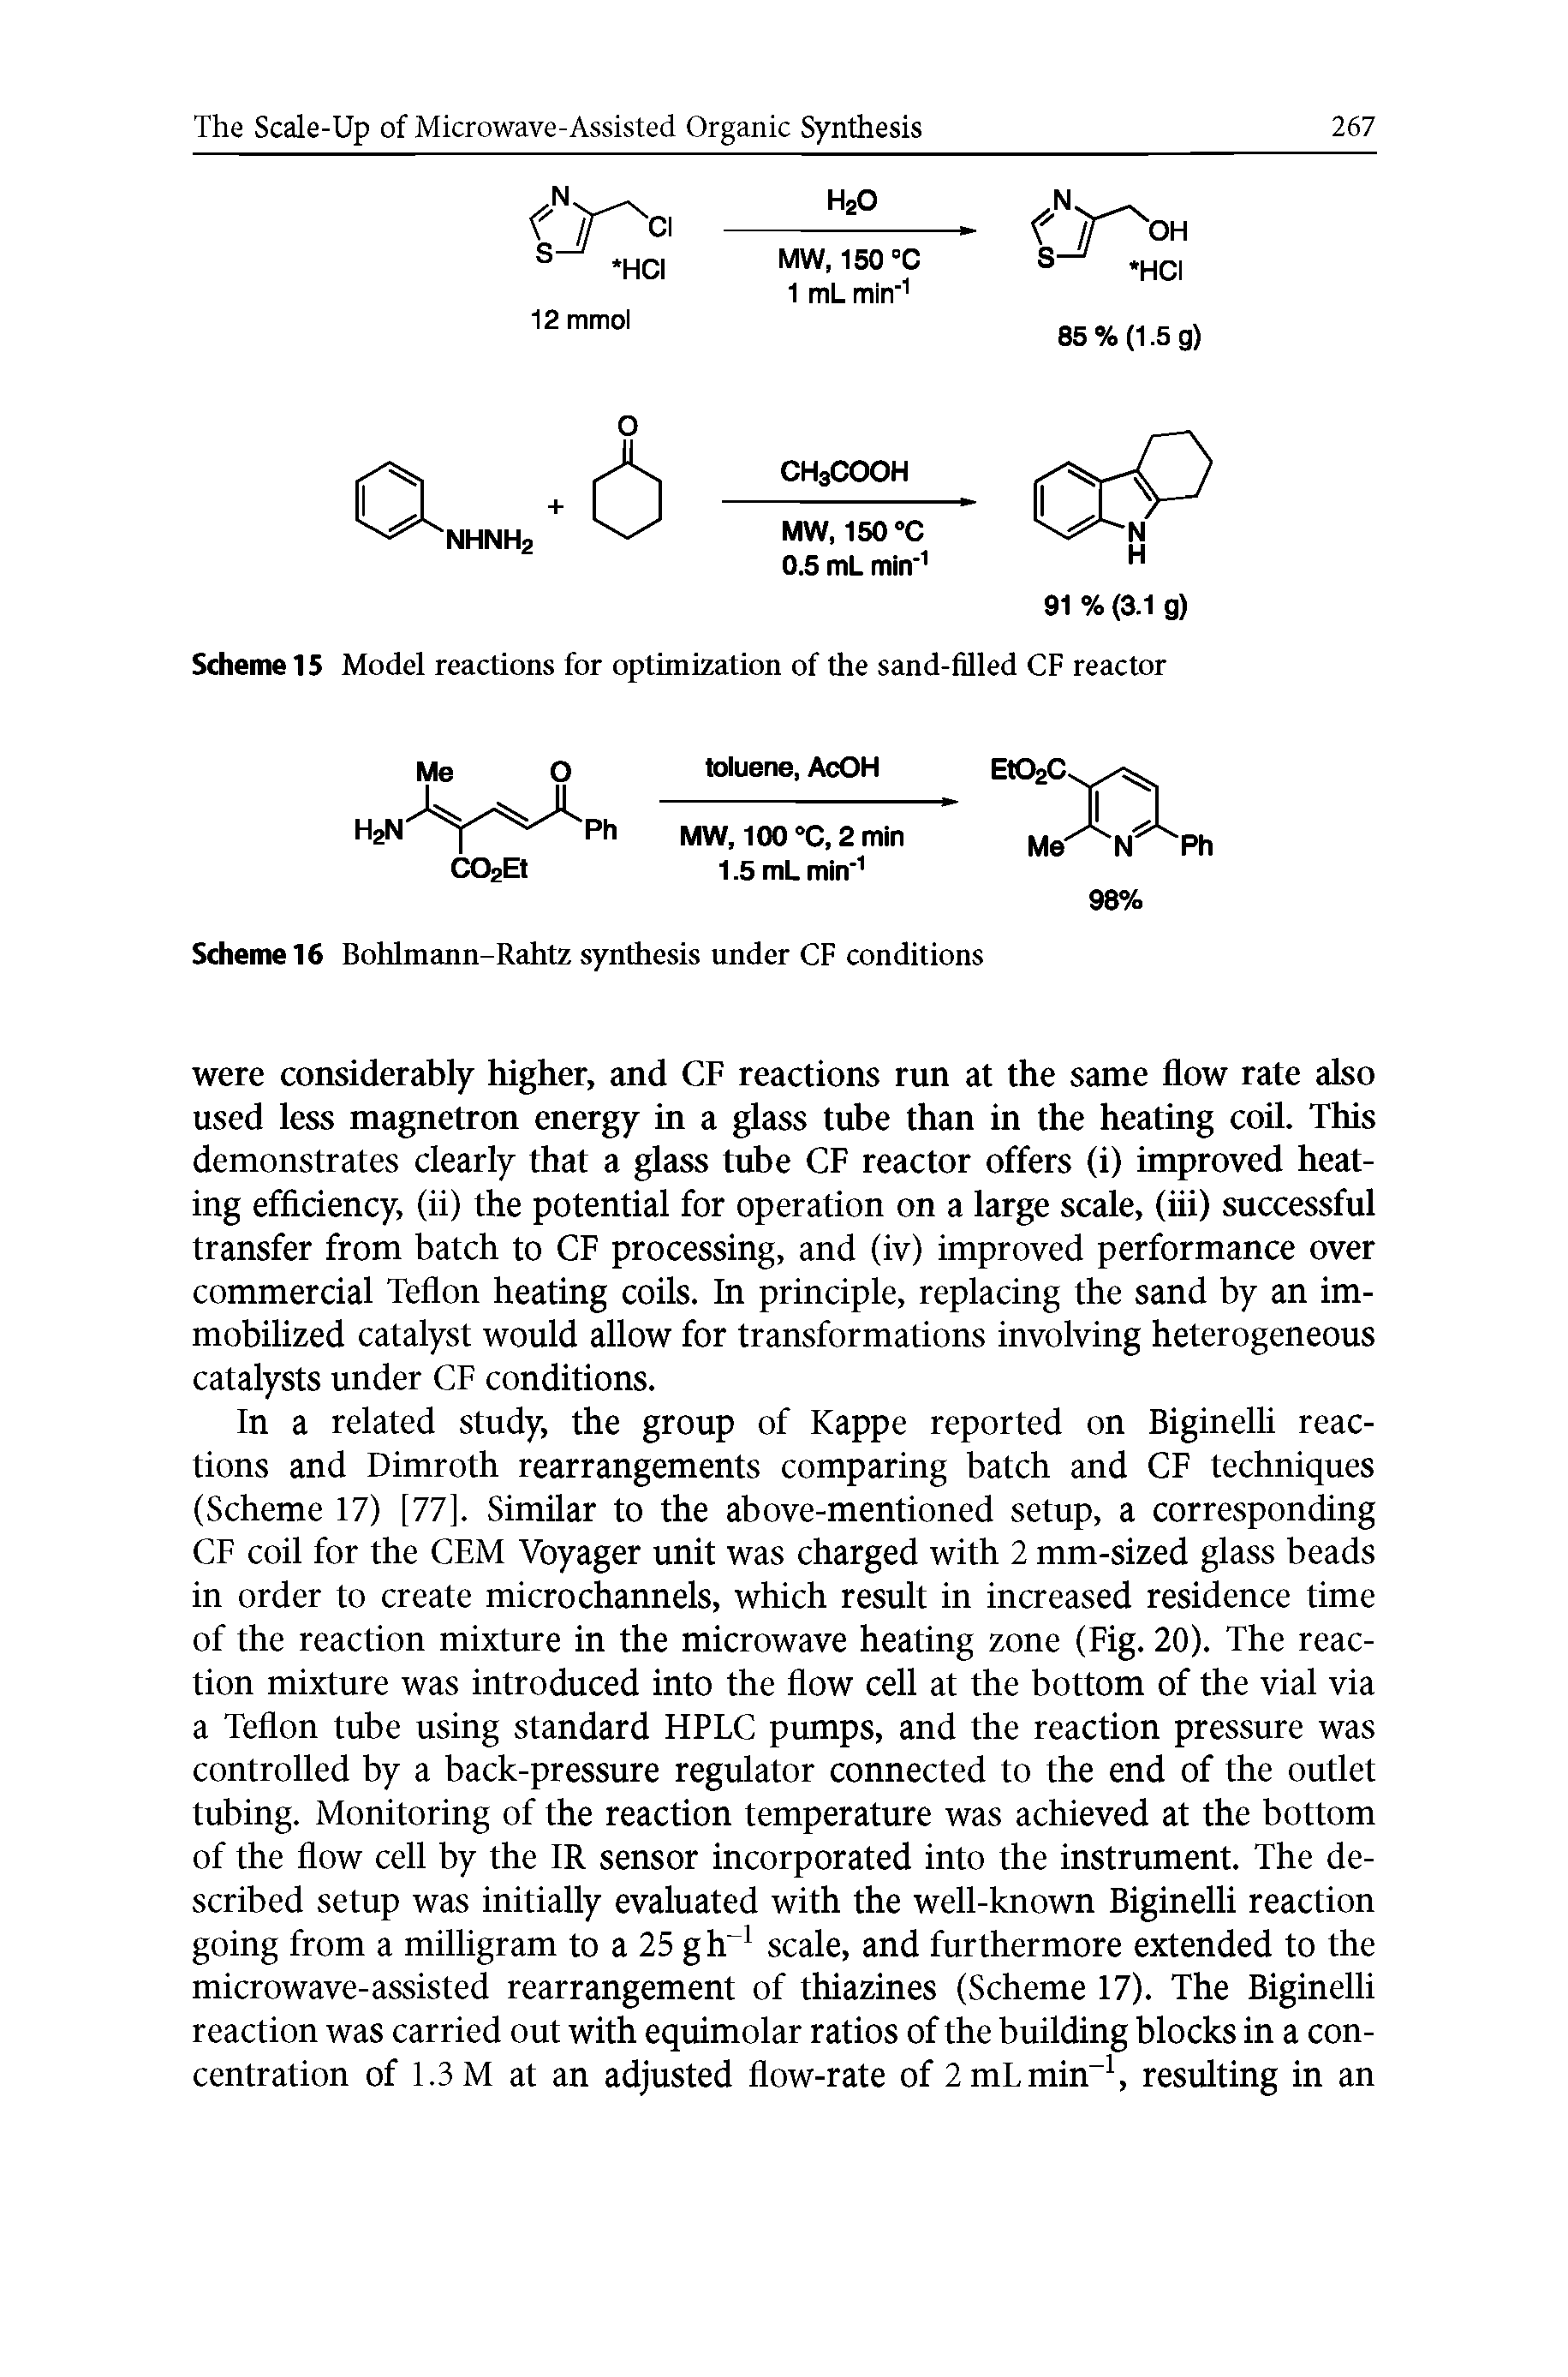 Scheme 15 Model reactions for optimization of the sand-filled CF reactor...